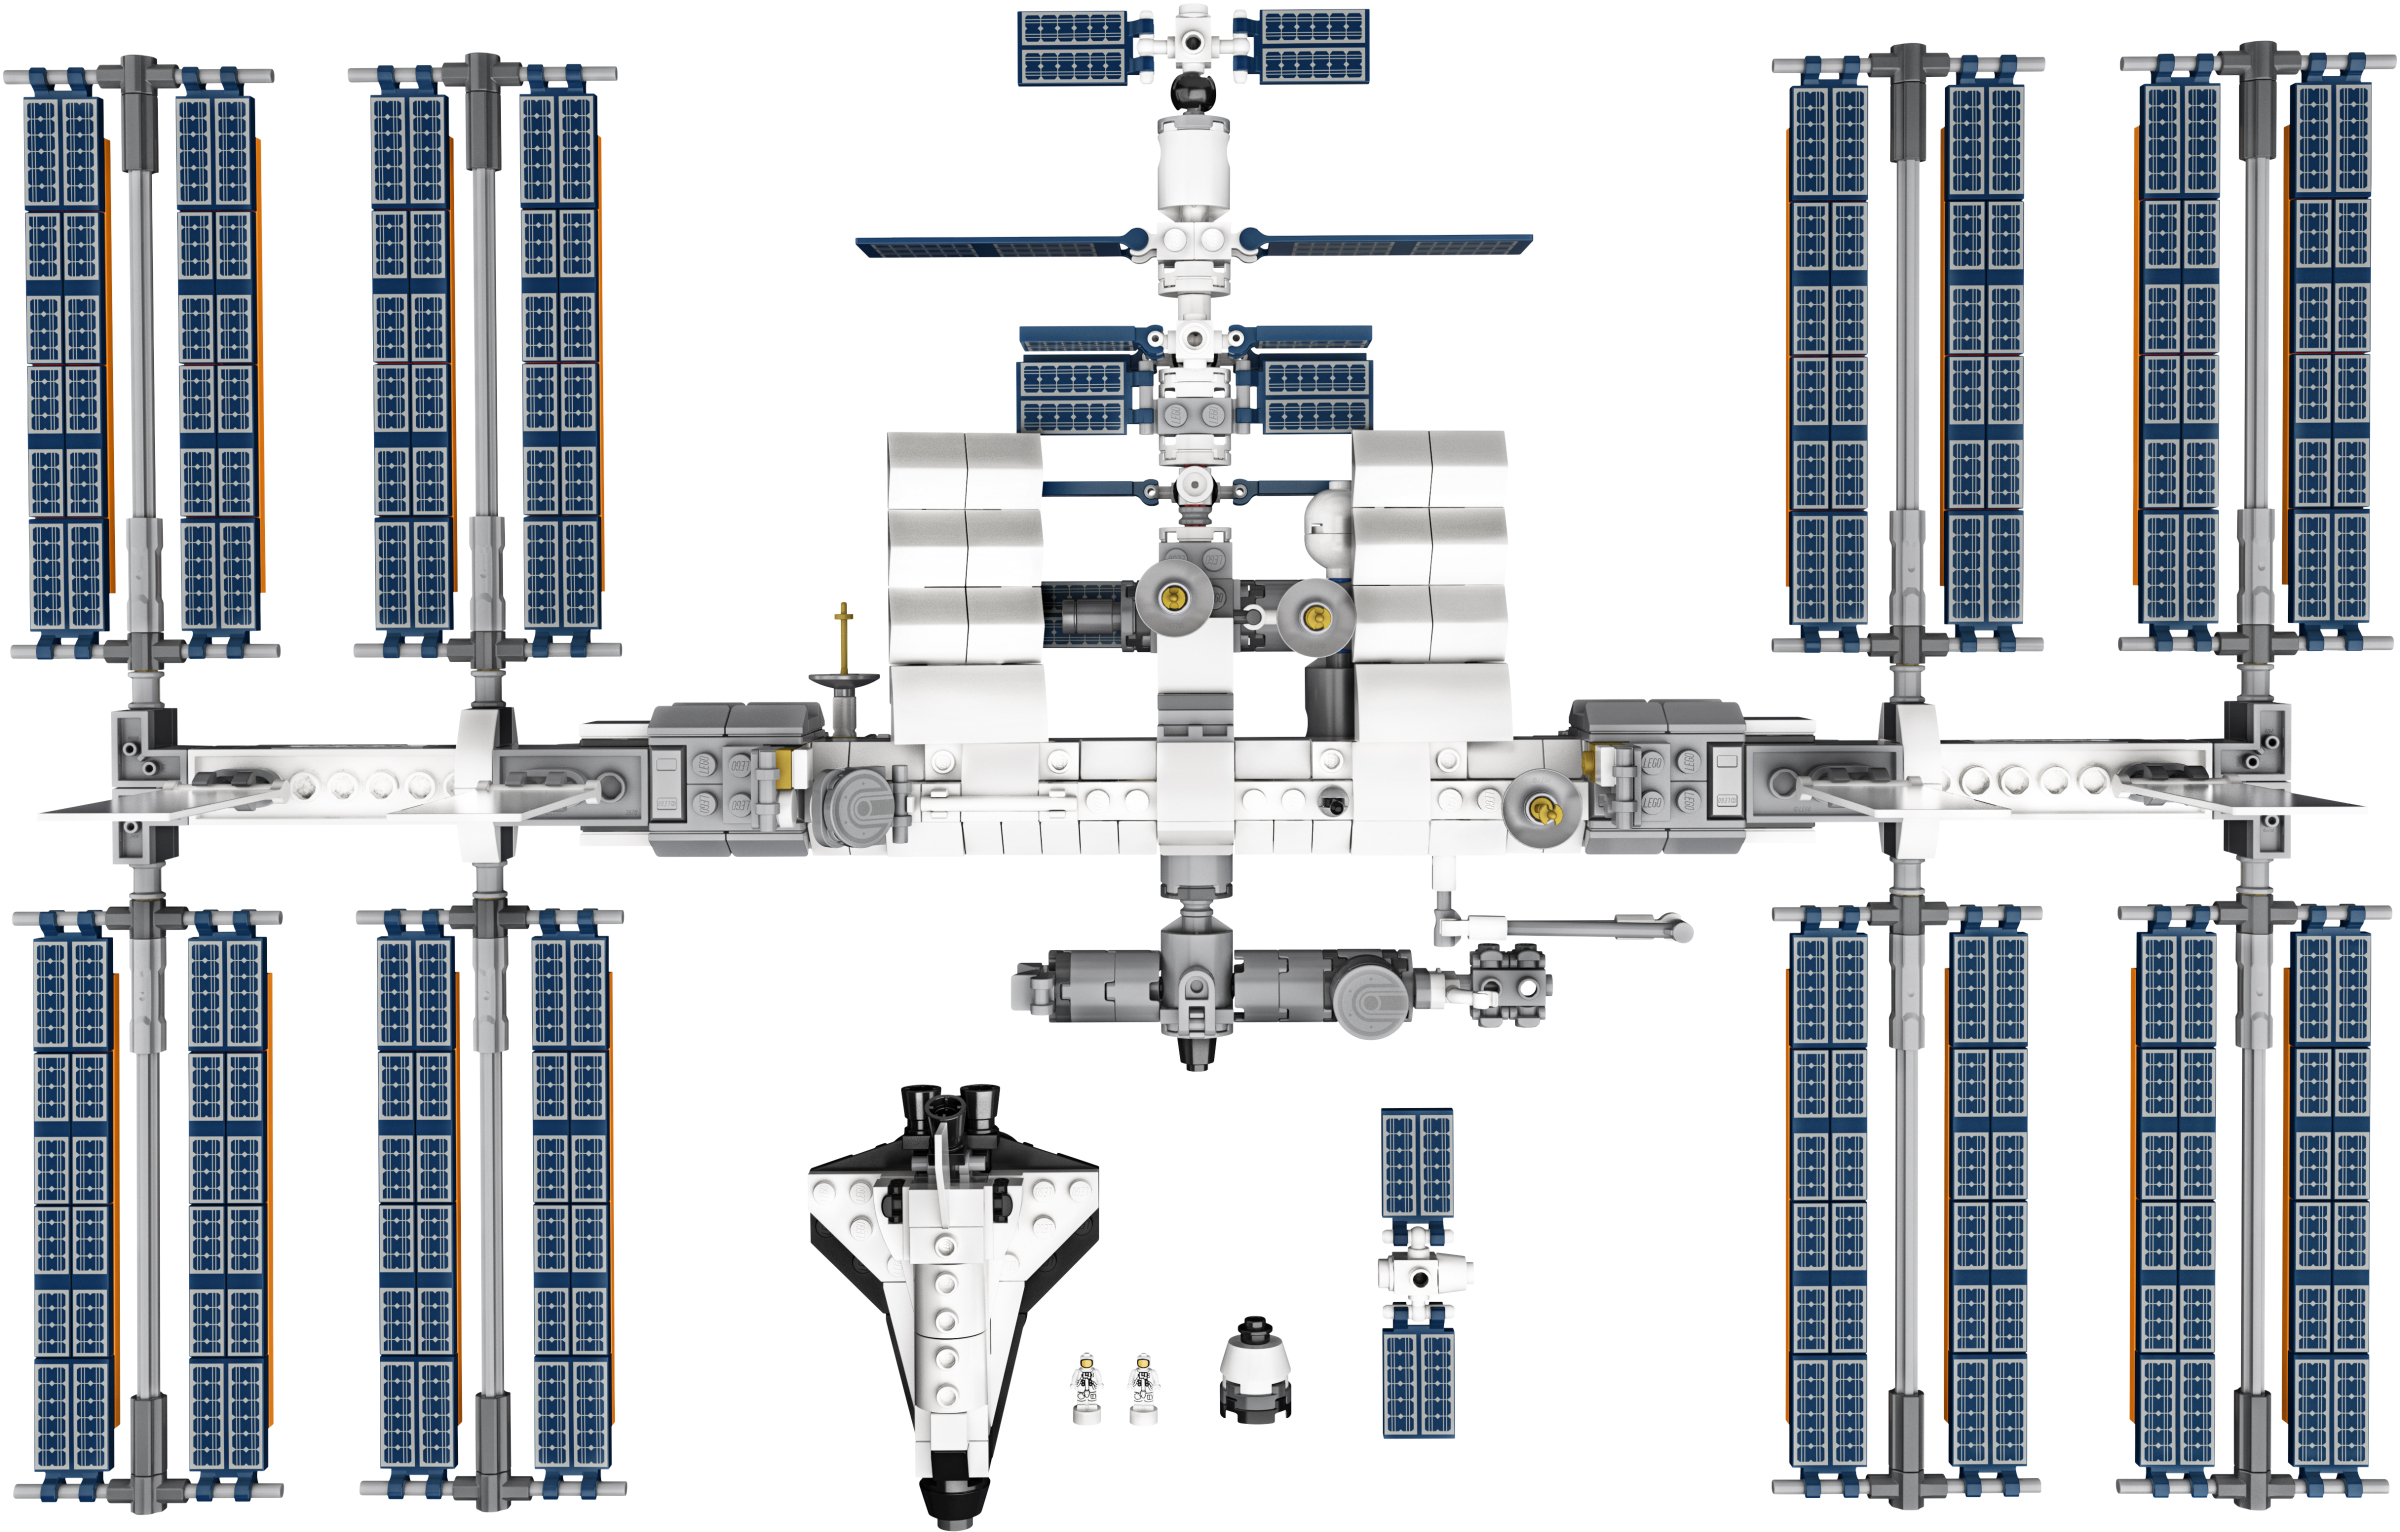 coloring pages international space station